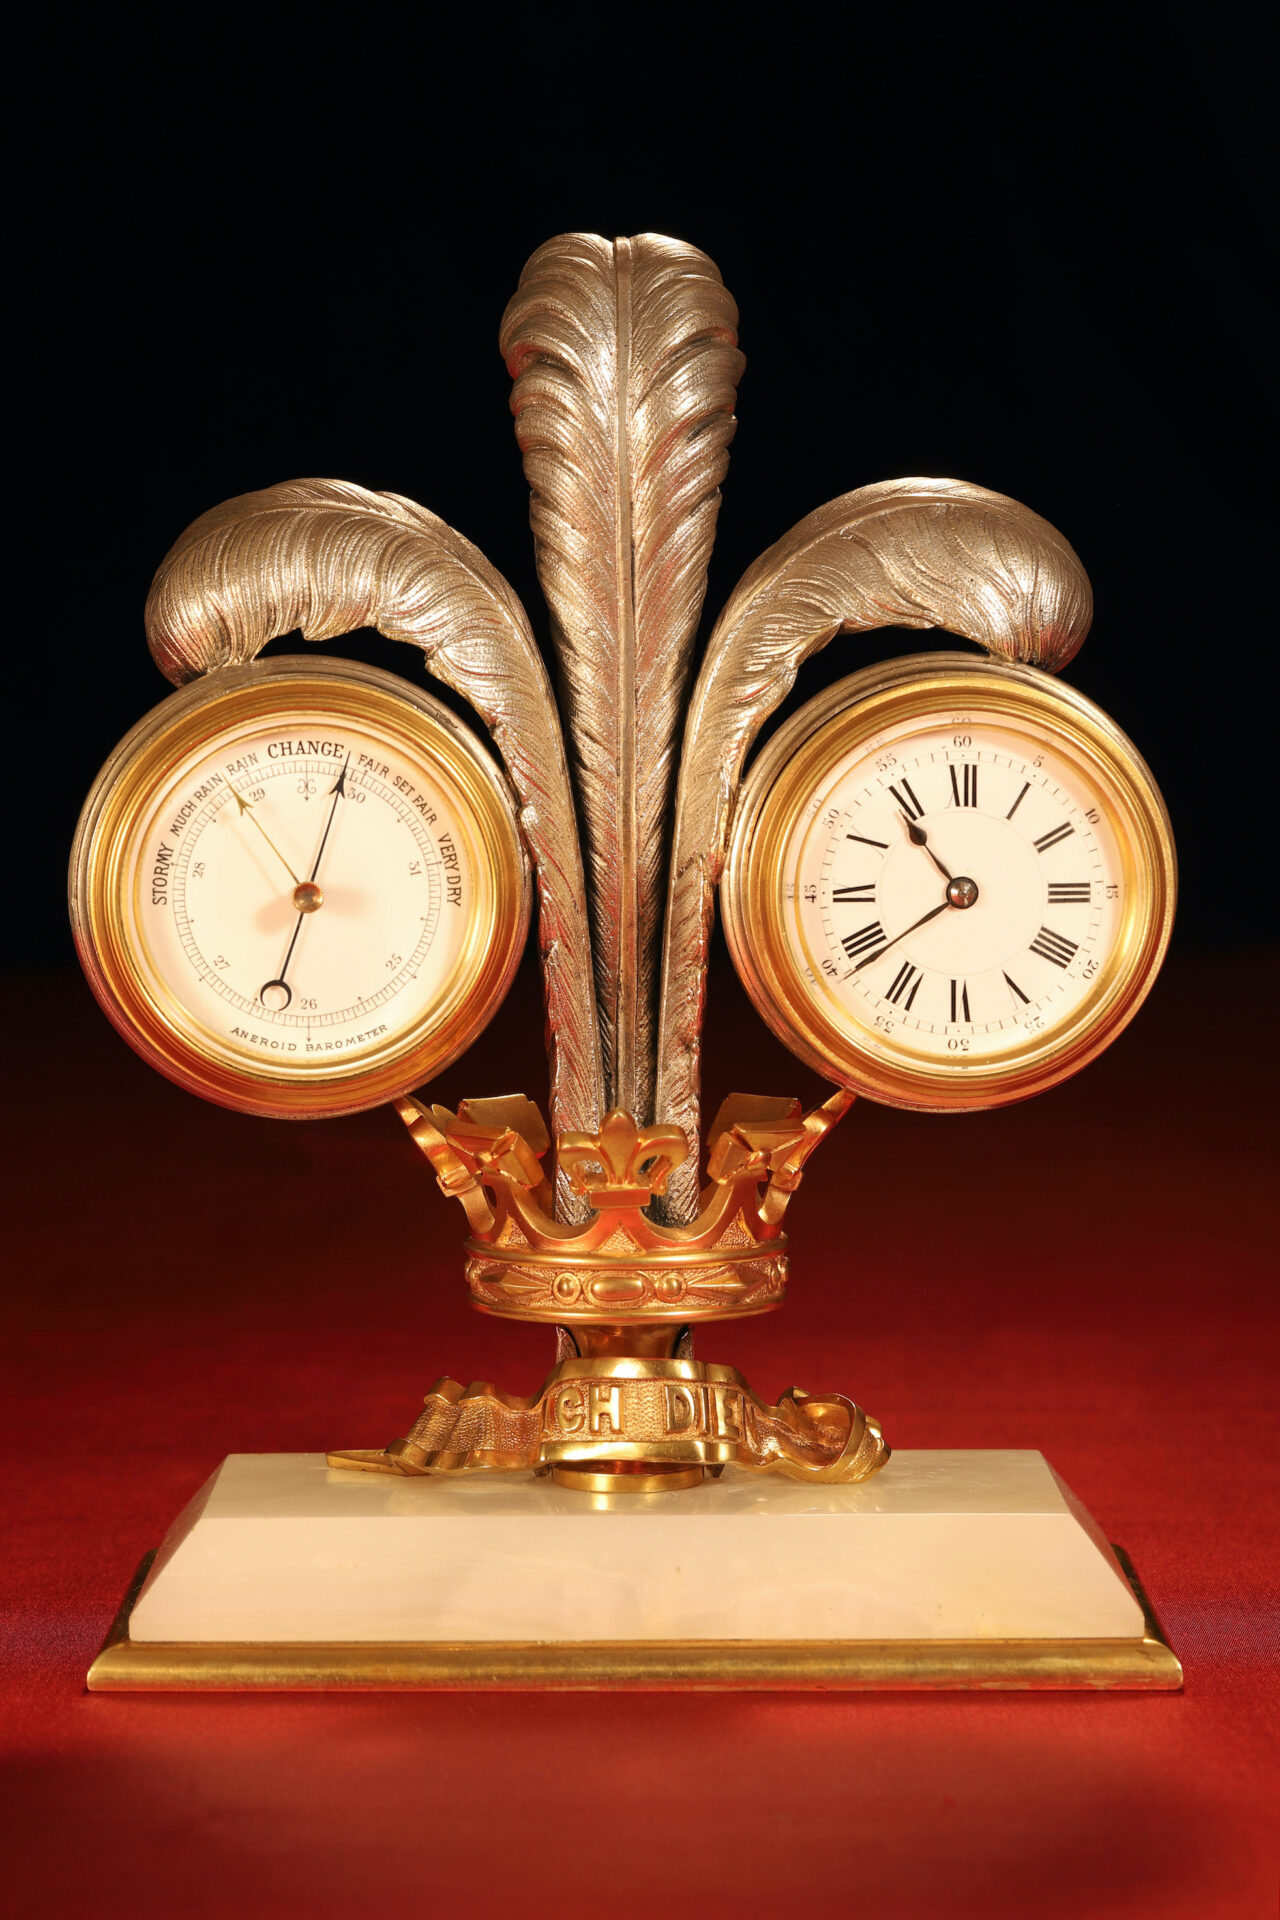 Image of Prince of Wales Feathers Desk Compendium c1880